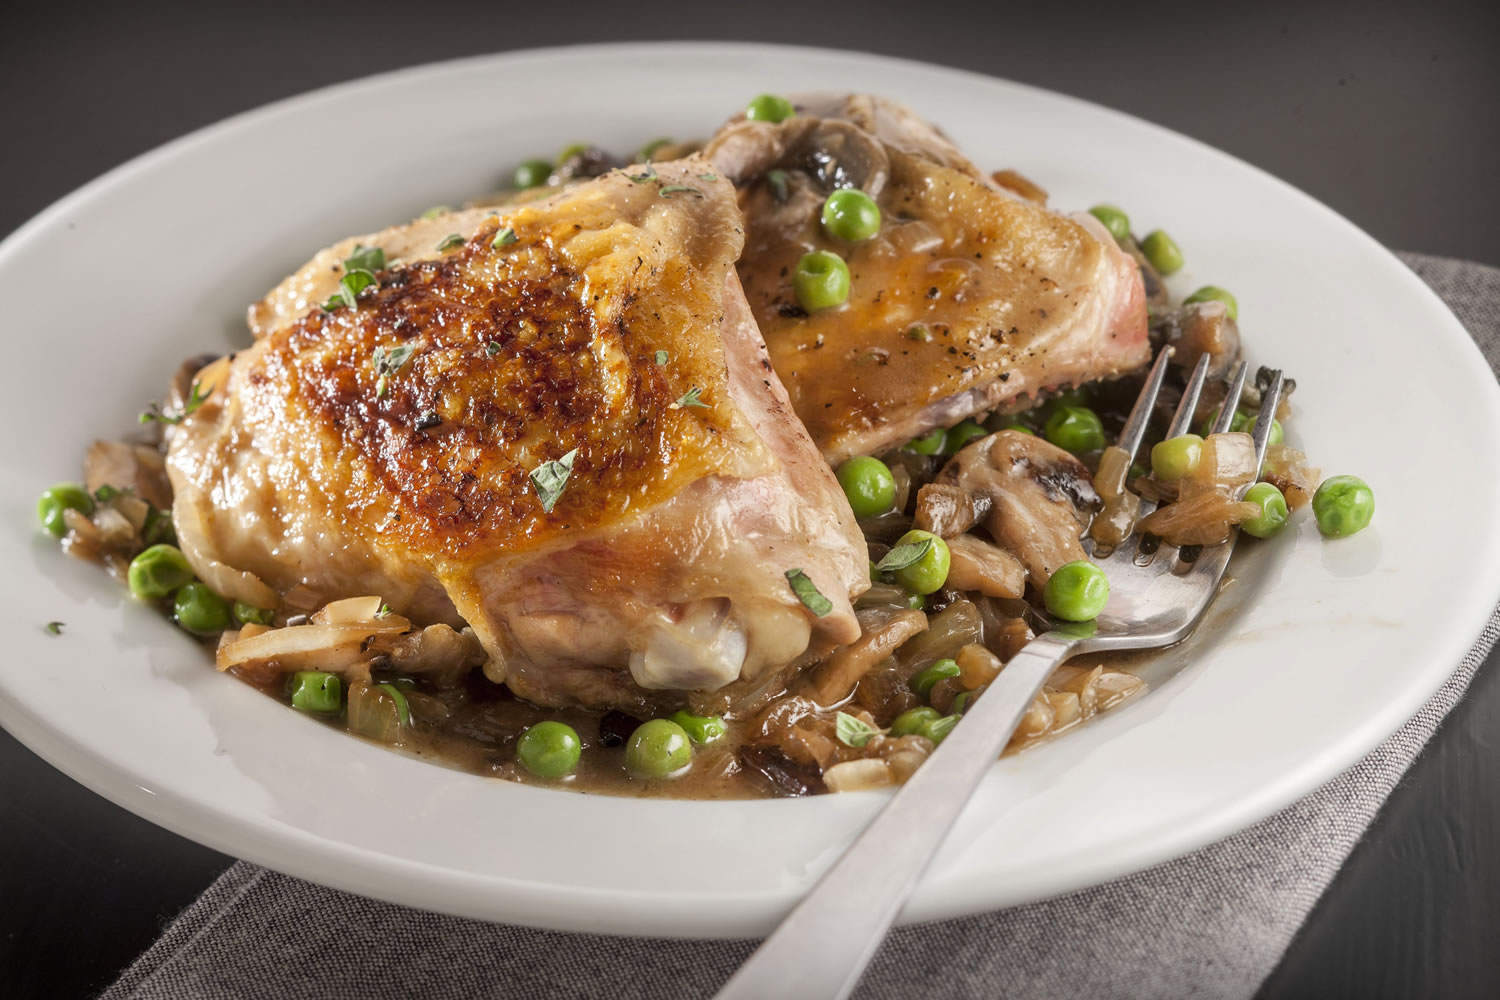 Skillet chicken with onions, peas, mushrooms makes a good spring or summer dish.